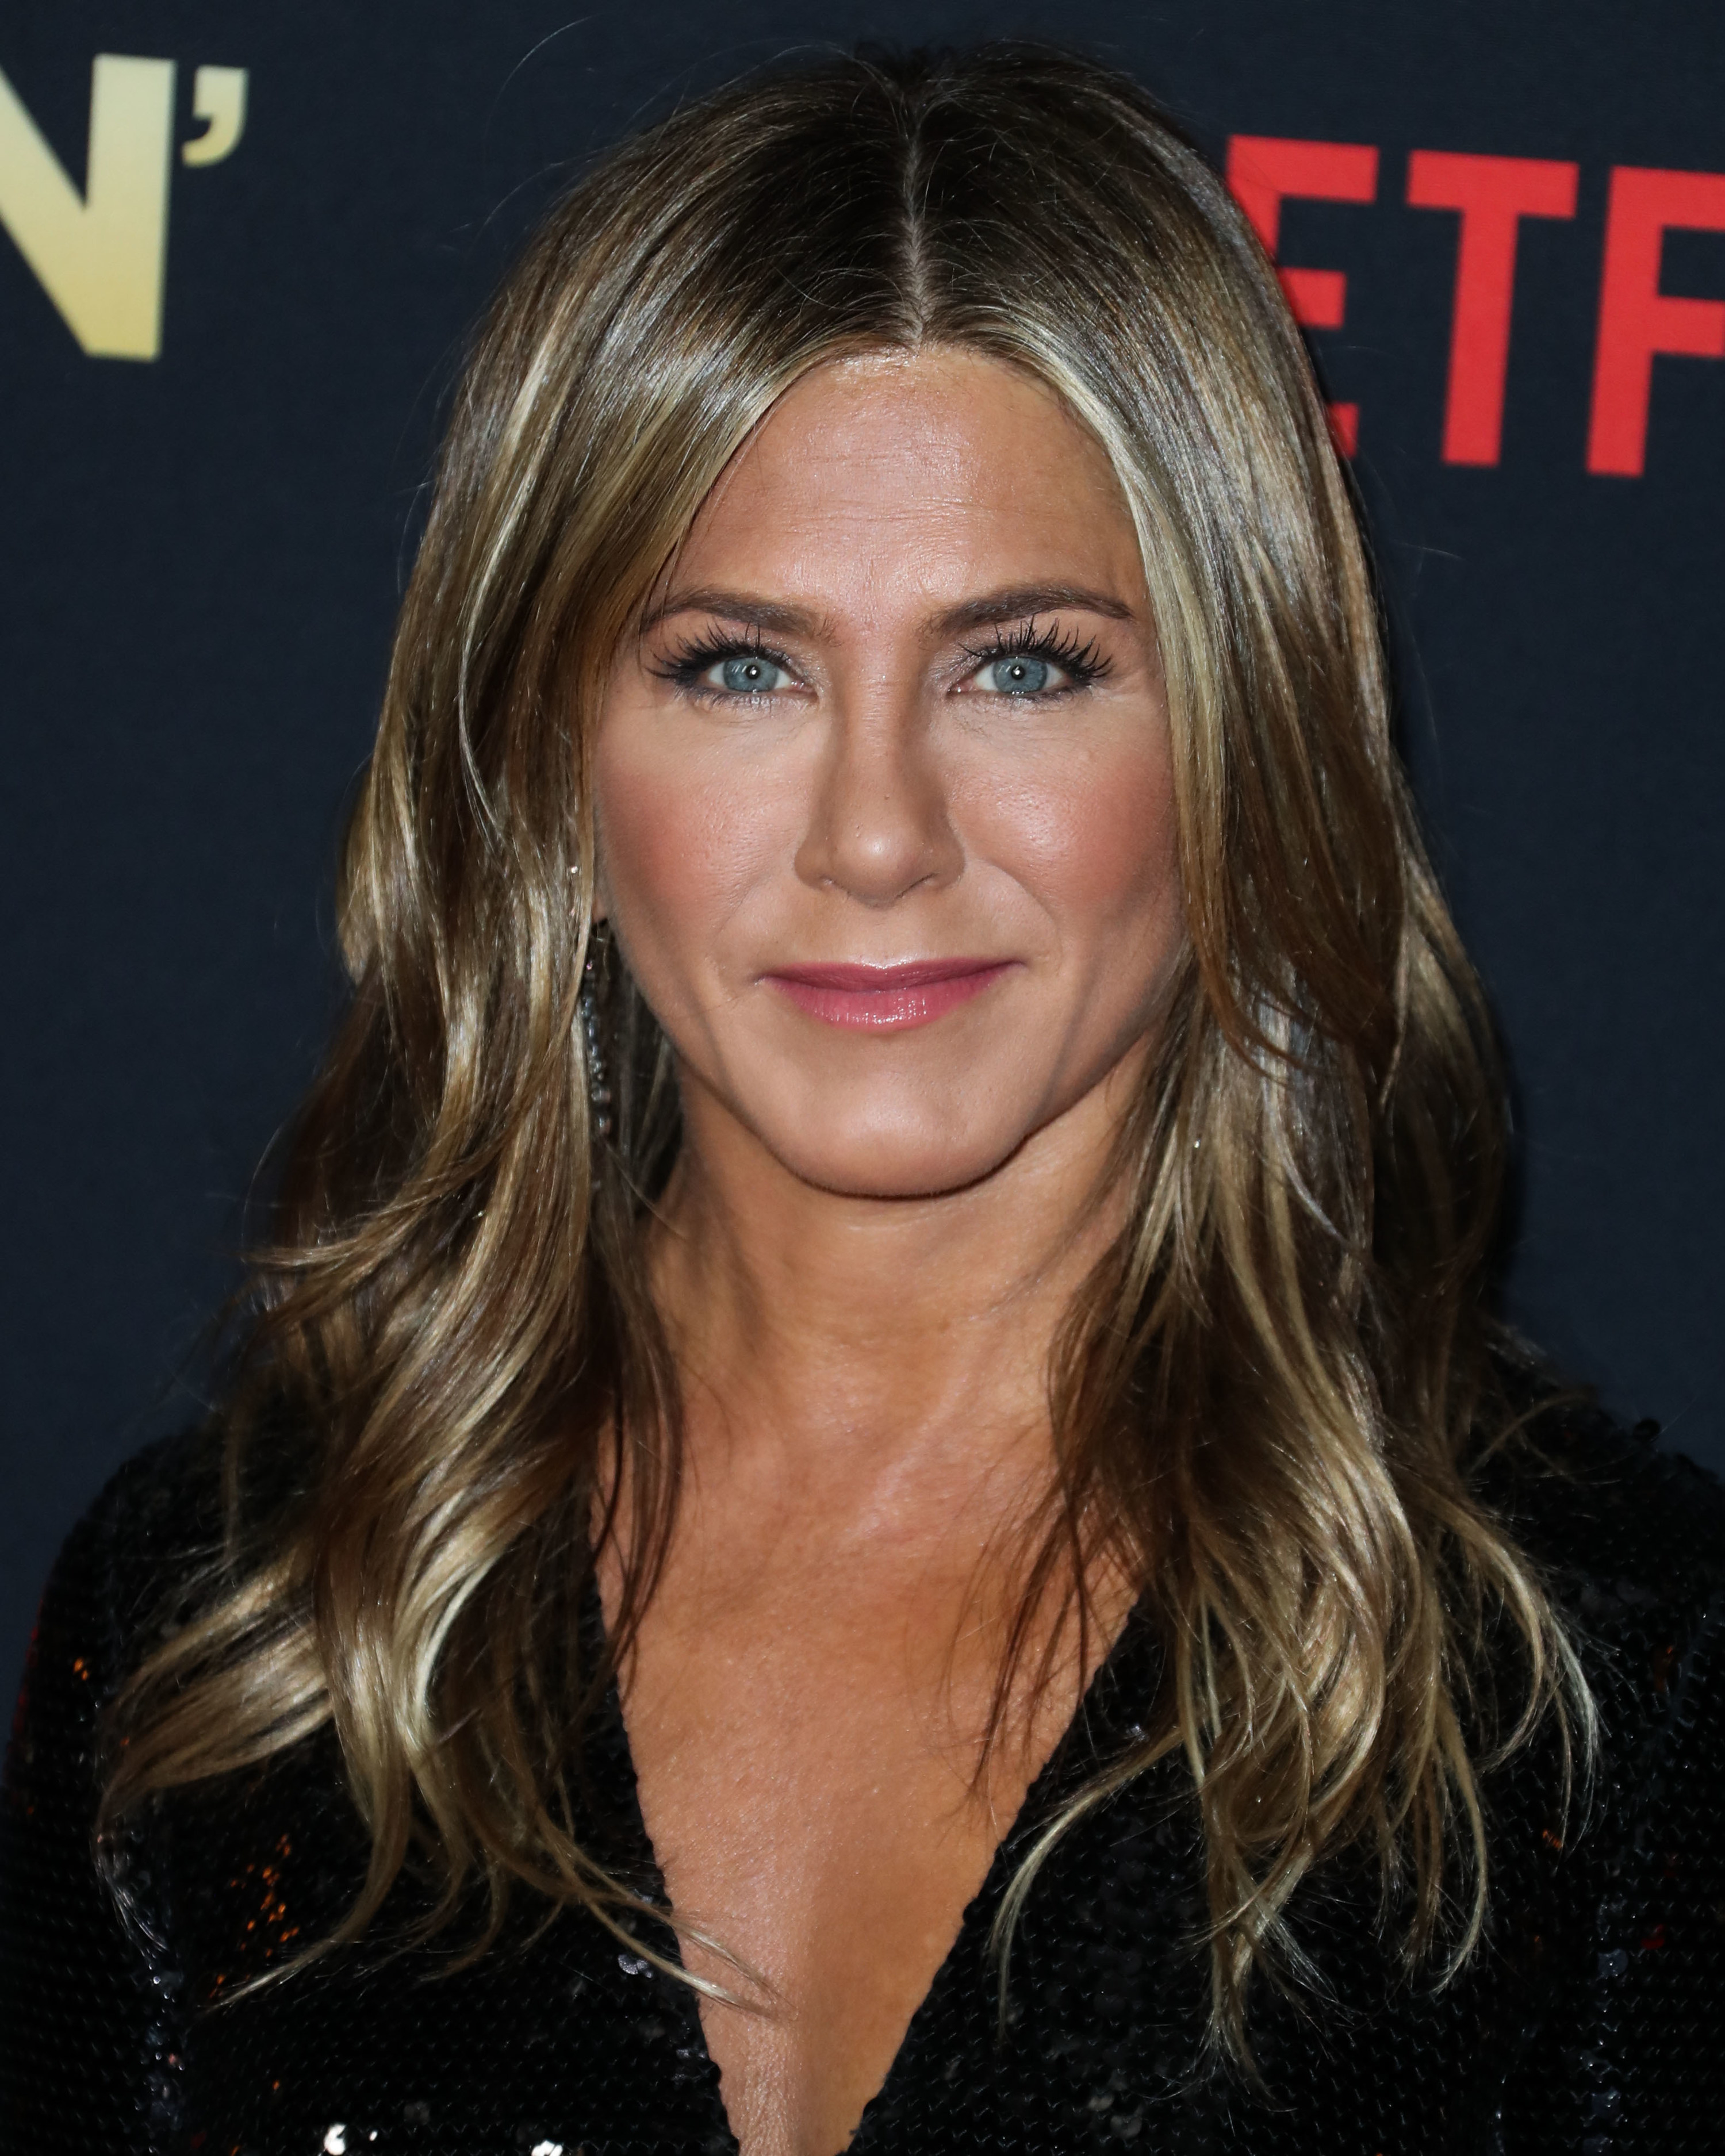 Jennifer Aniston Nude Fucking - Jennifer Aniston Said She Only Joined Instagram To Promote Her New TV Show